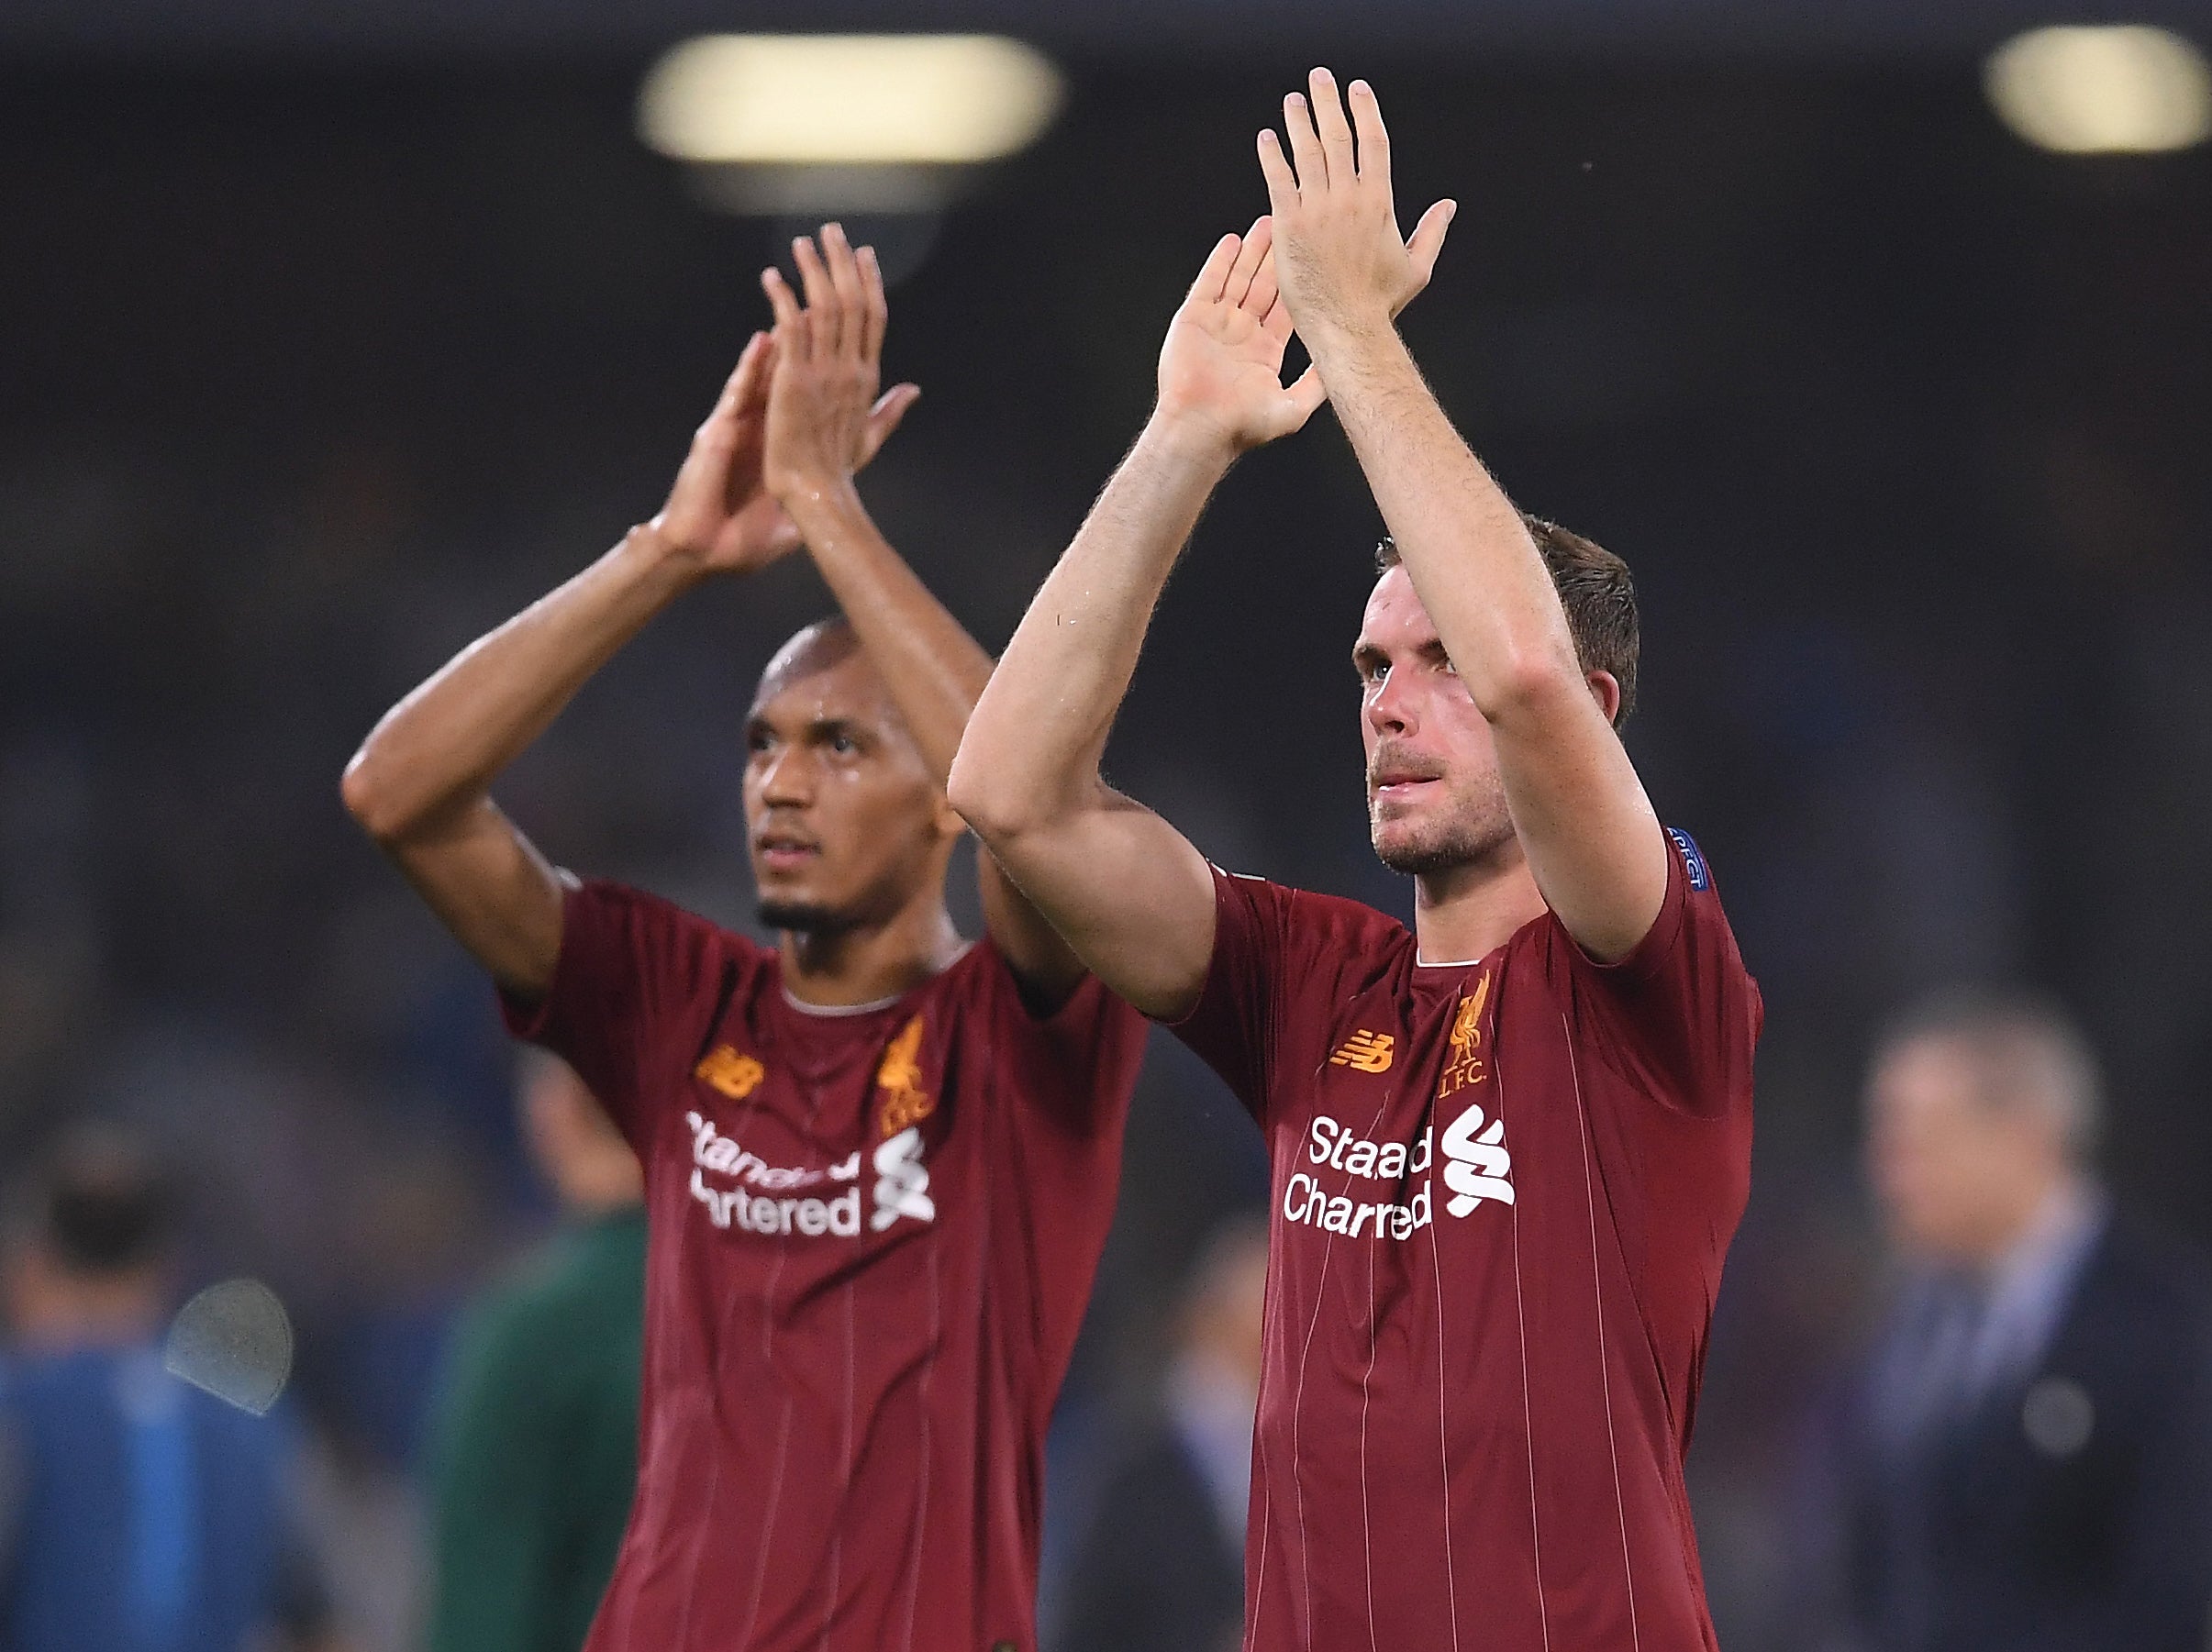 Liverpool captain Jordan Henderson explains where his team went wrong against Napoli in Champions League